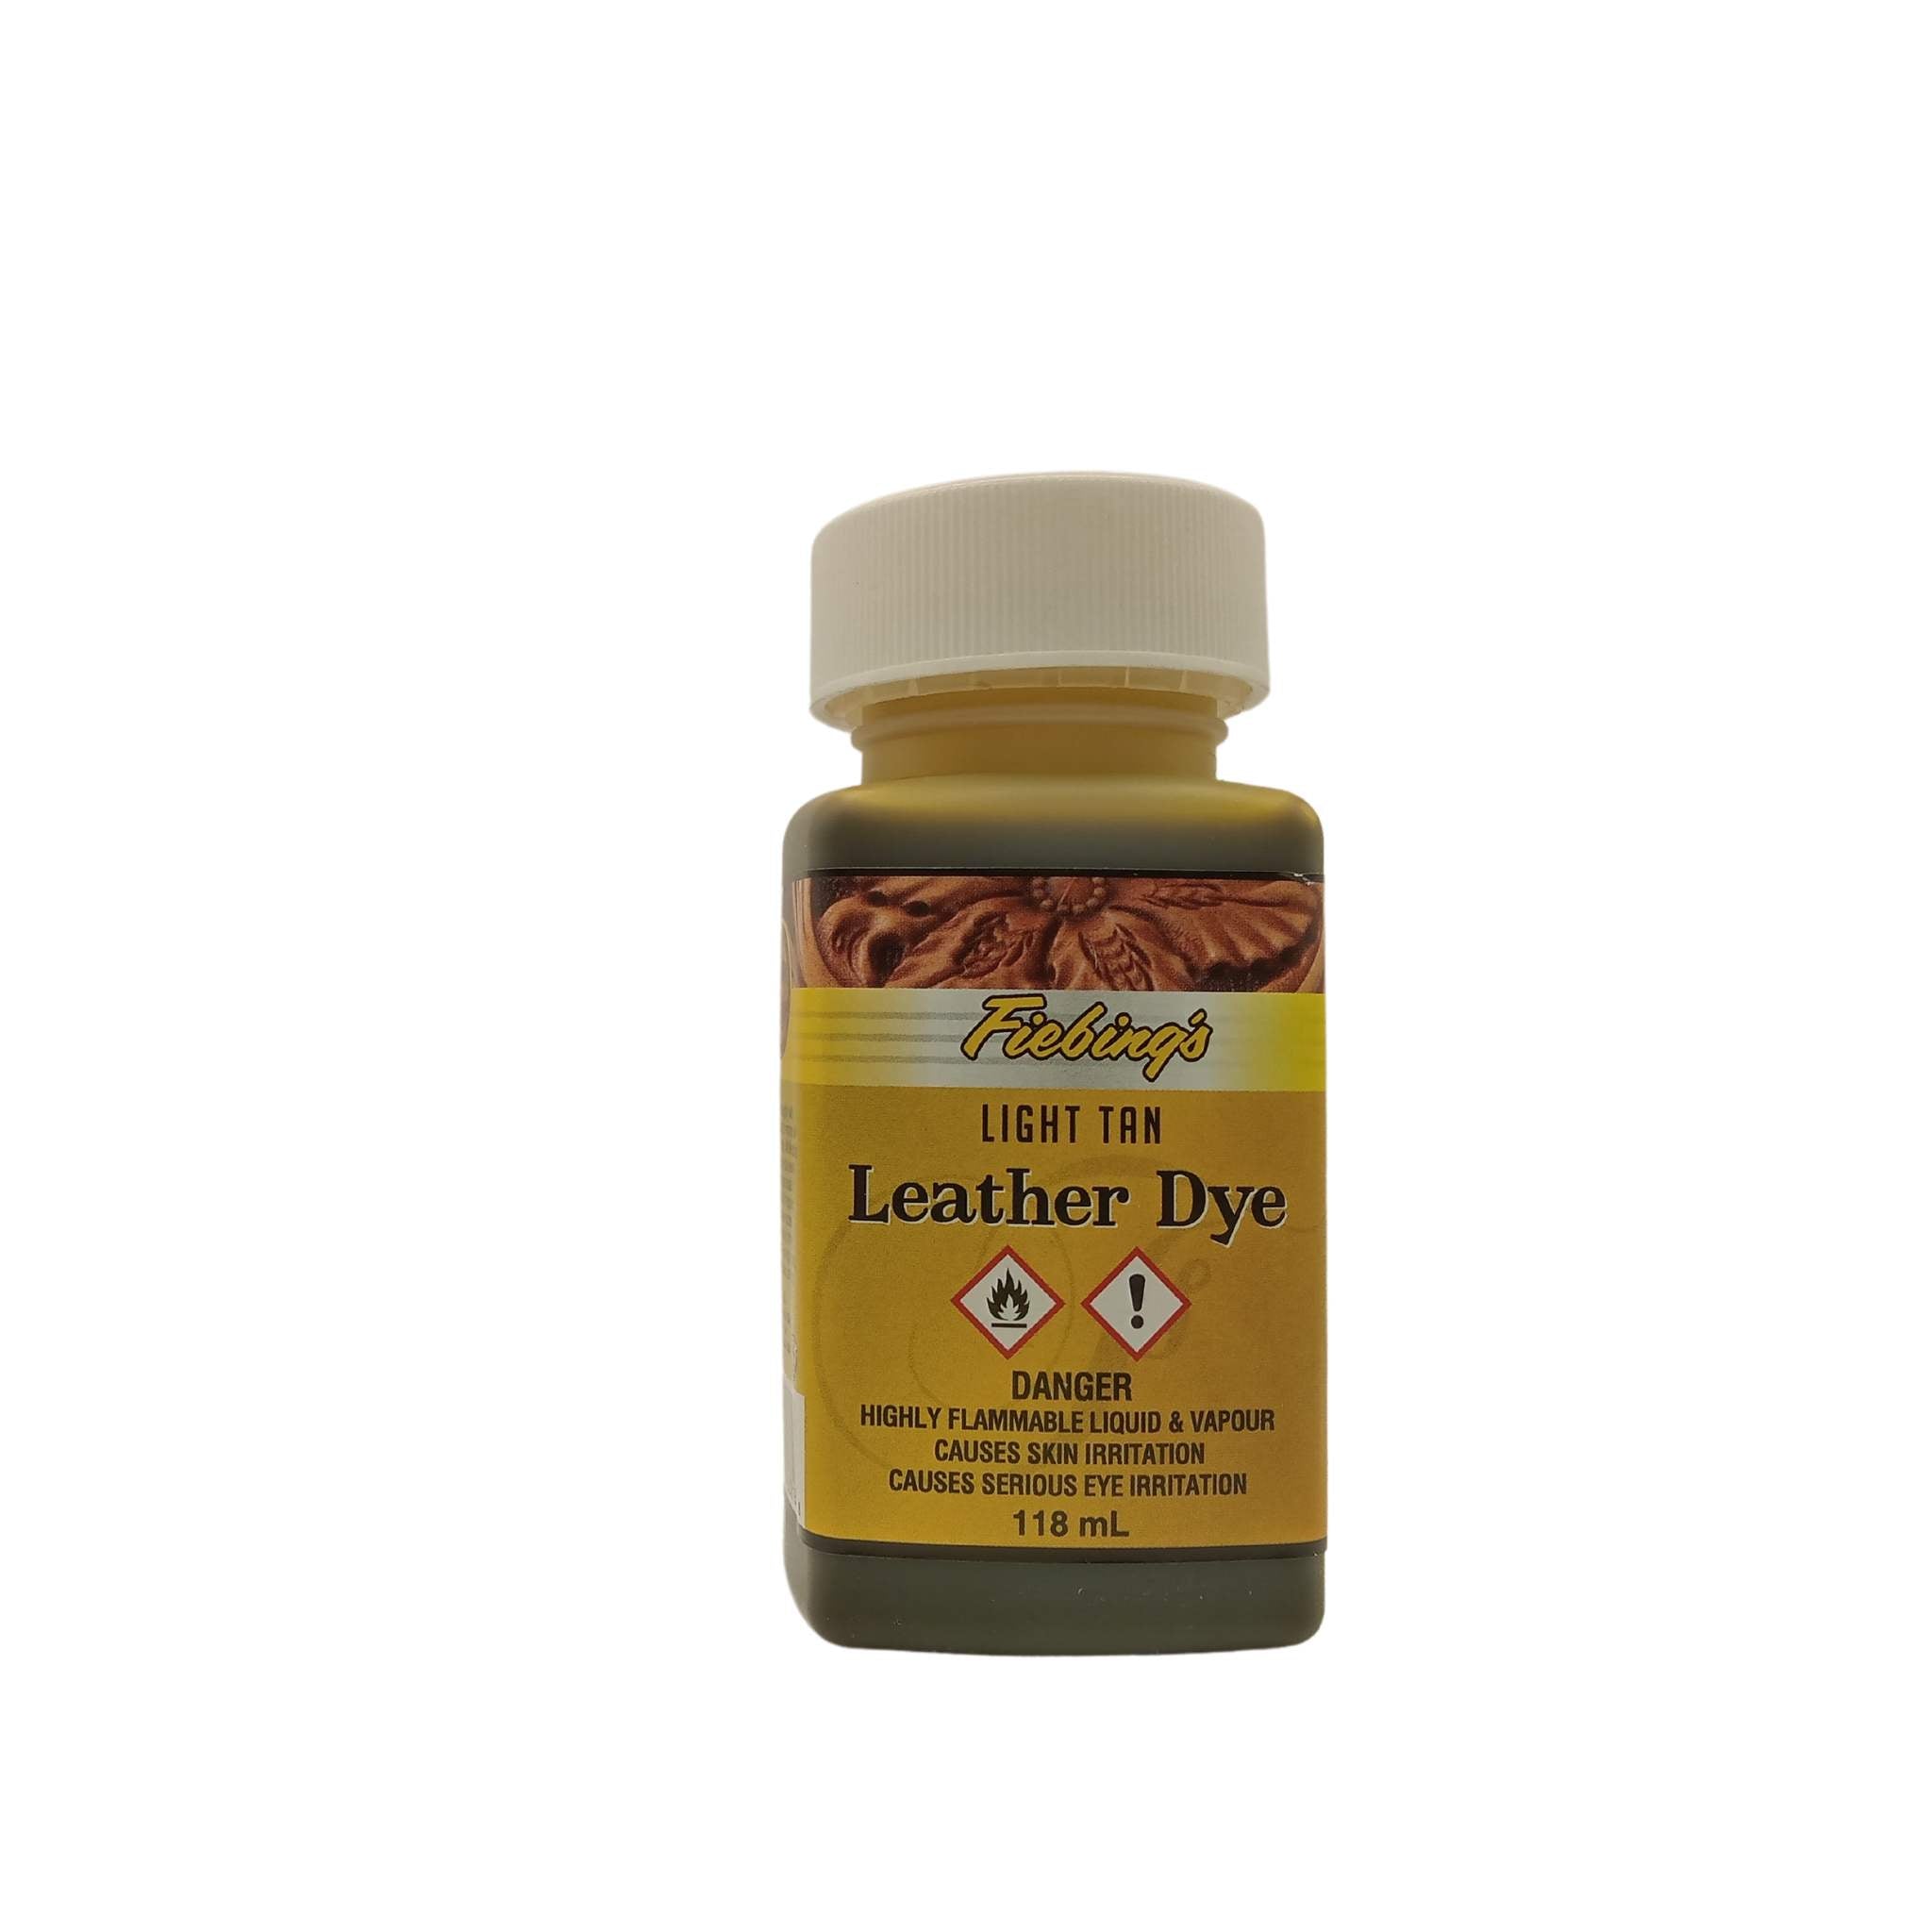 Dye your leathercraft projects with this Fiebing's solvent based leather dye - Light Tan